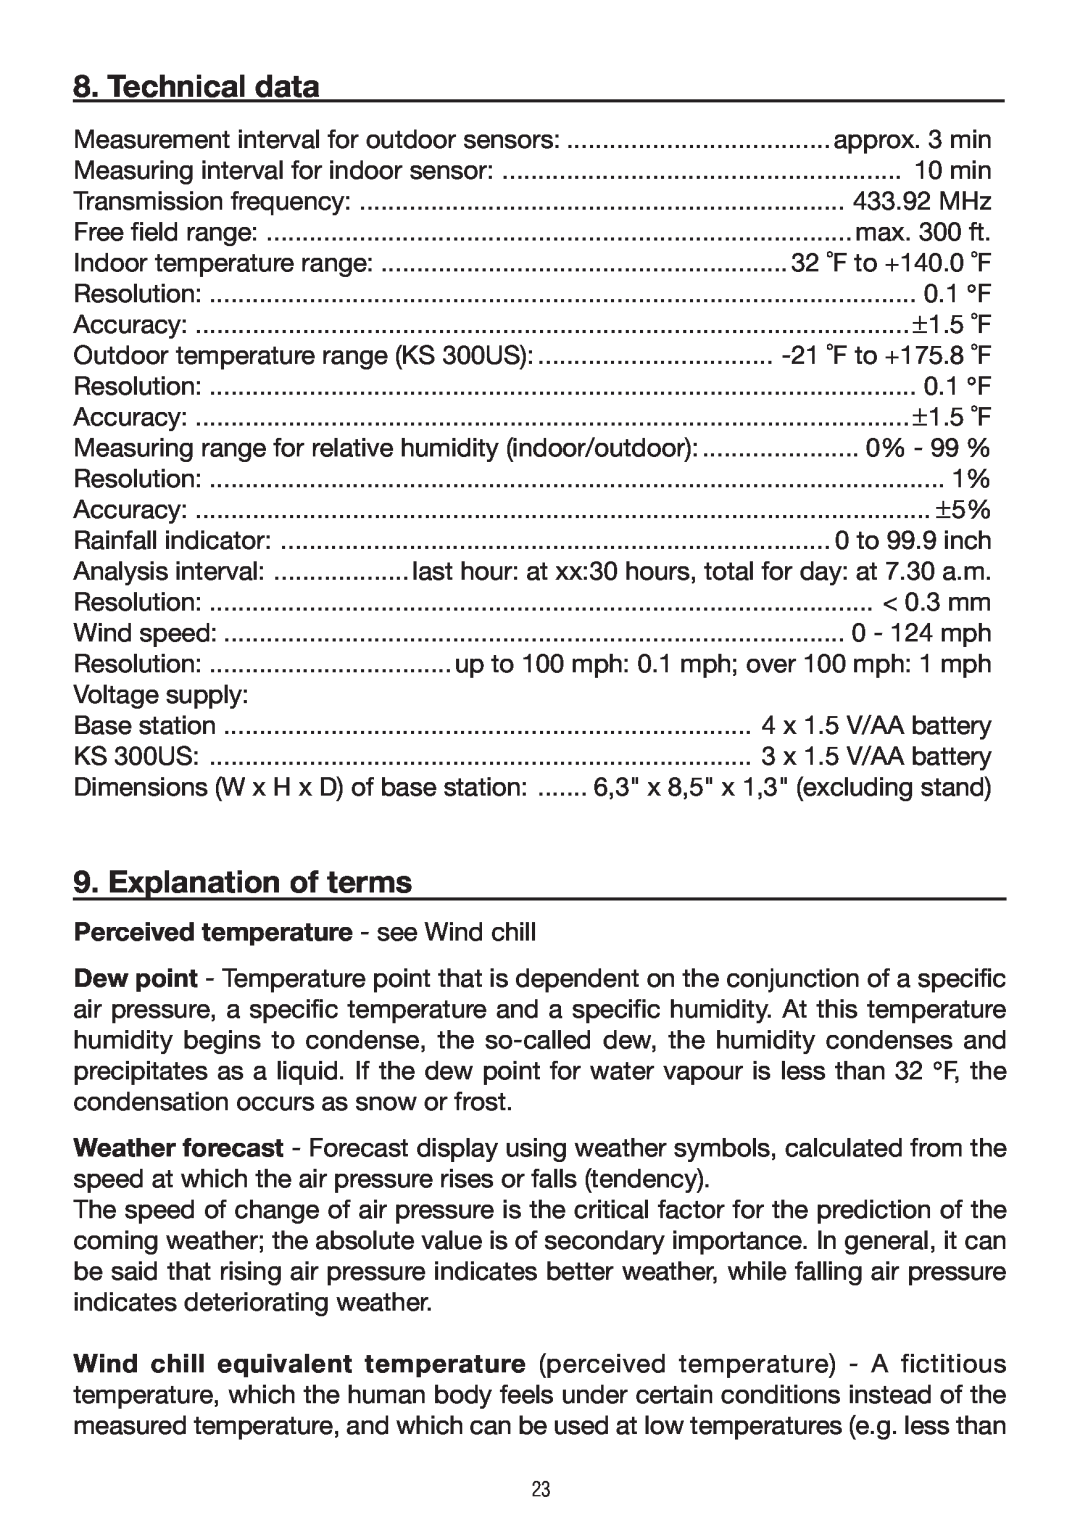 P3 International E 9300 operating instructions Technical data, Explanation of terms, Perceived temperature - see Wind chill 